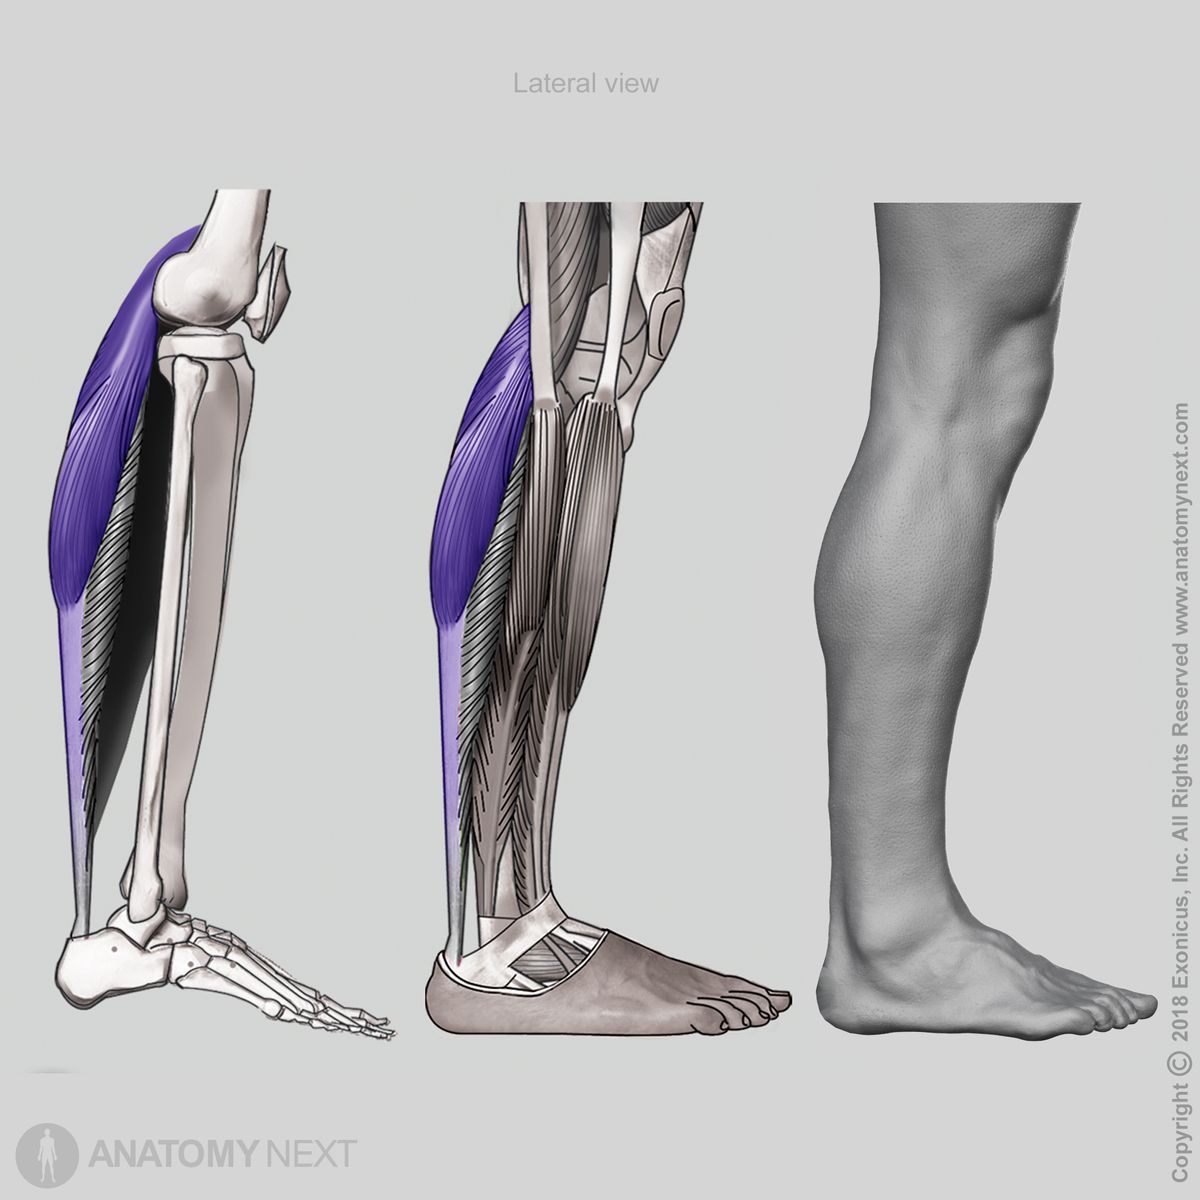 Gastrocnemius, Origin of gastrocnemius, Insertion of gastrocnemius, Superficial layer of posterior leg muscles, Superficial posterior leg muscles, Posterior compartment muscles, Posterior compartment of leg, Leg muscles, Human leg, Lateral view of gastrocnemius